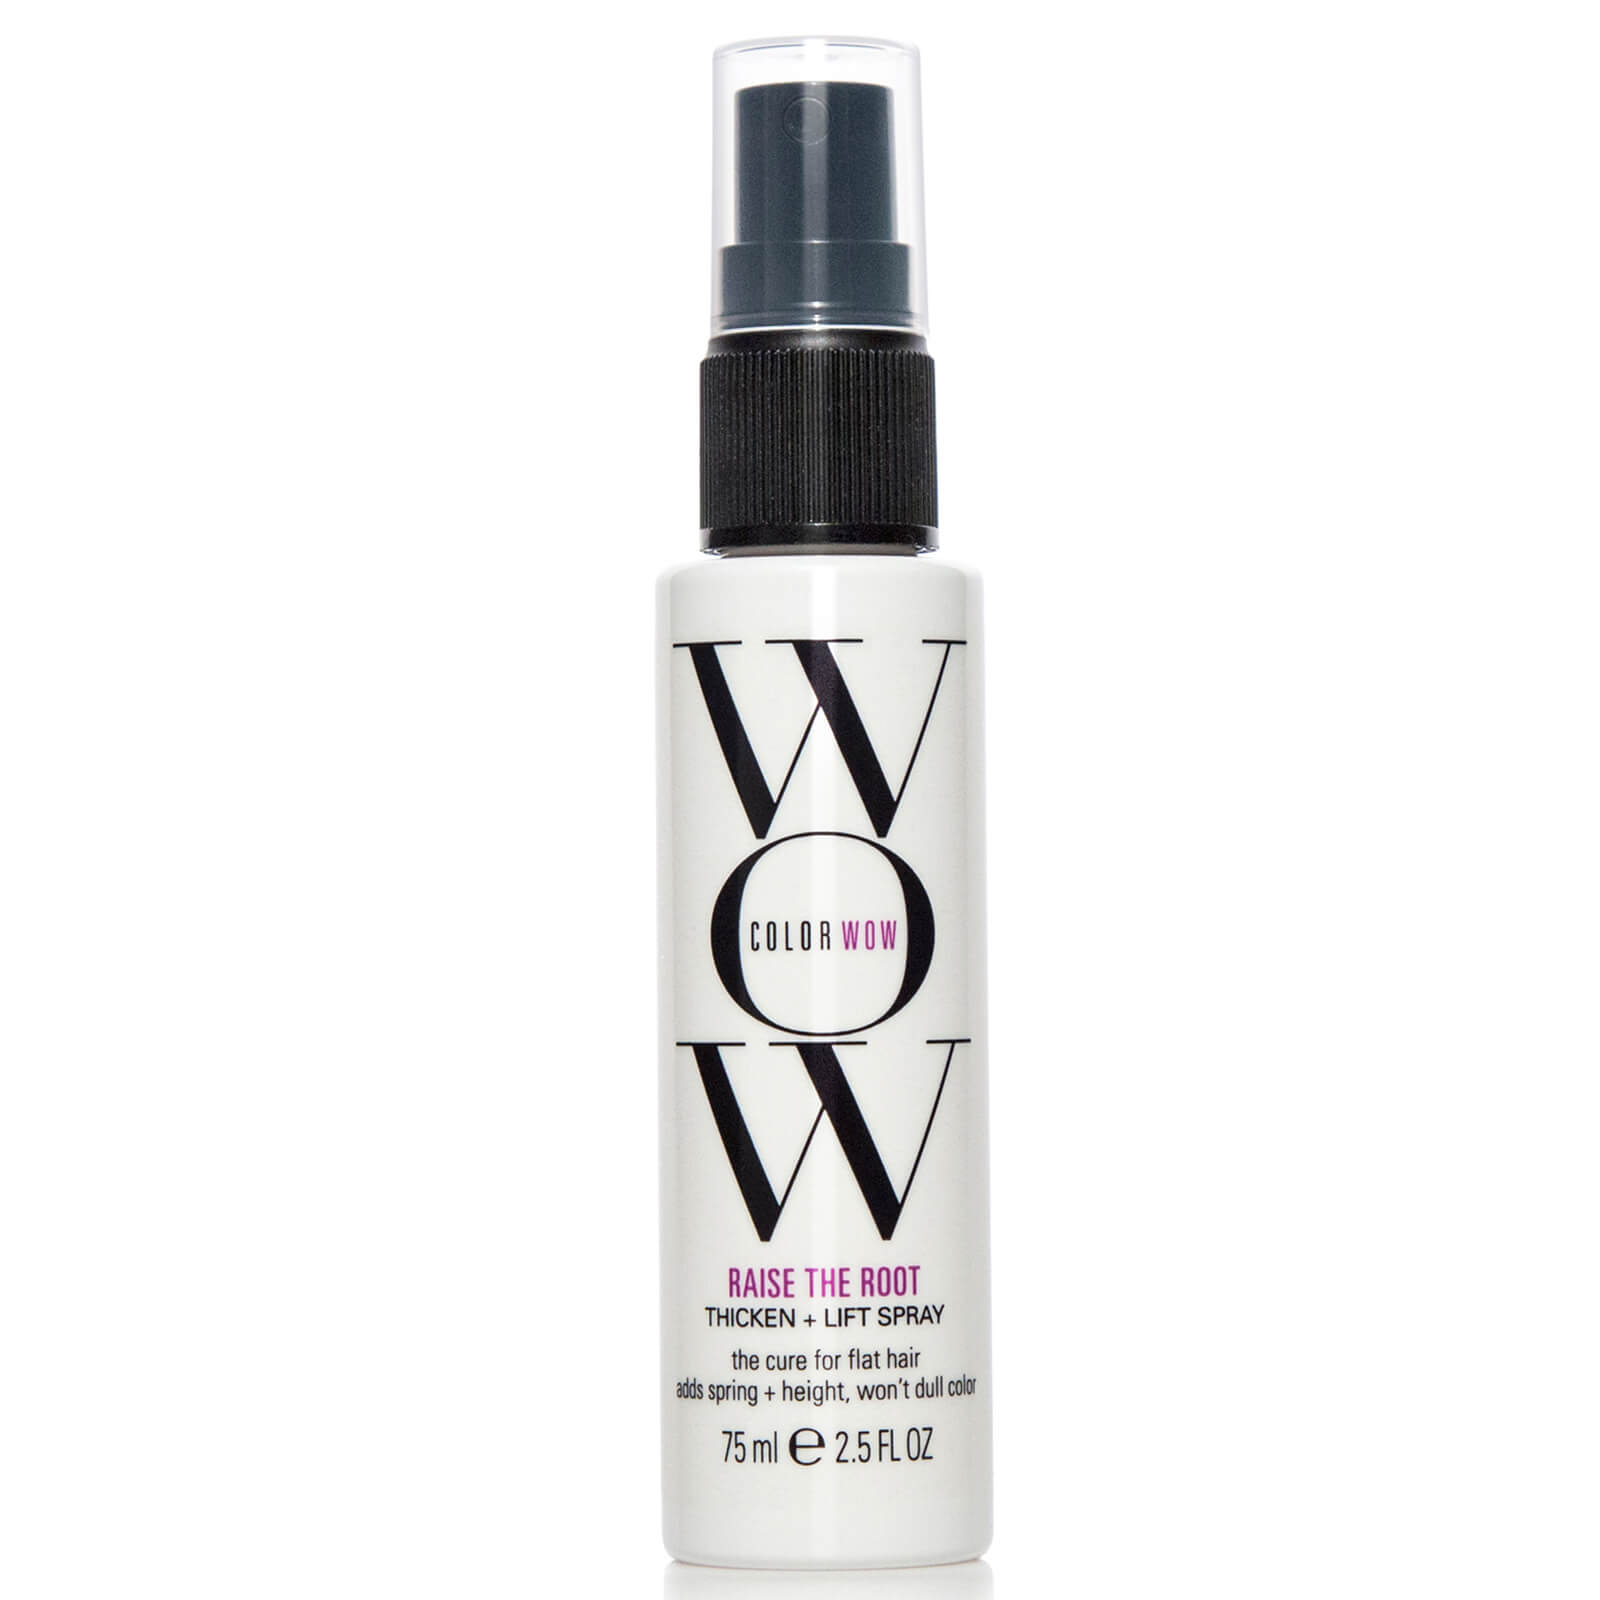 Best Hair Colours for Thin Hair: Color Wow Travel Raise The Root Thicken & Lift Spray